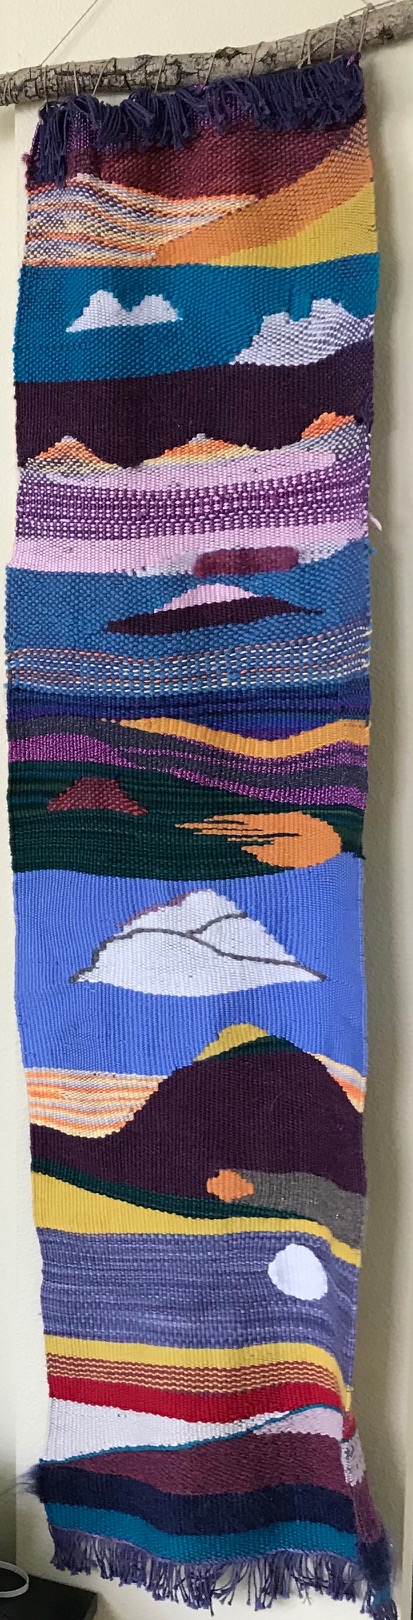 Weaving - Clouds and Sky (wall hanging)